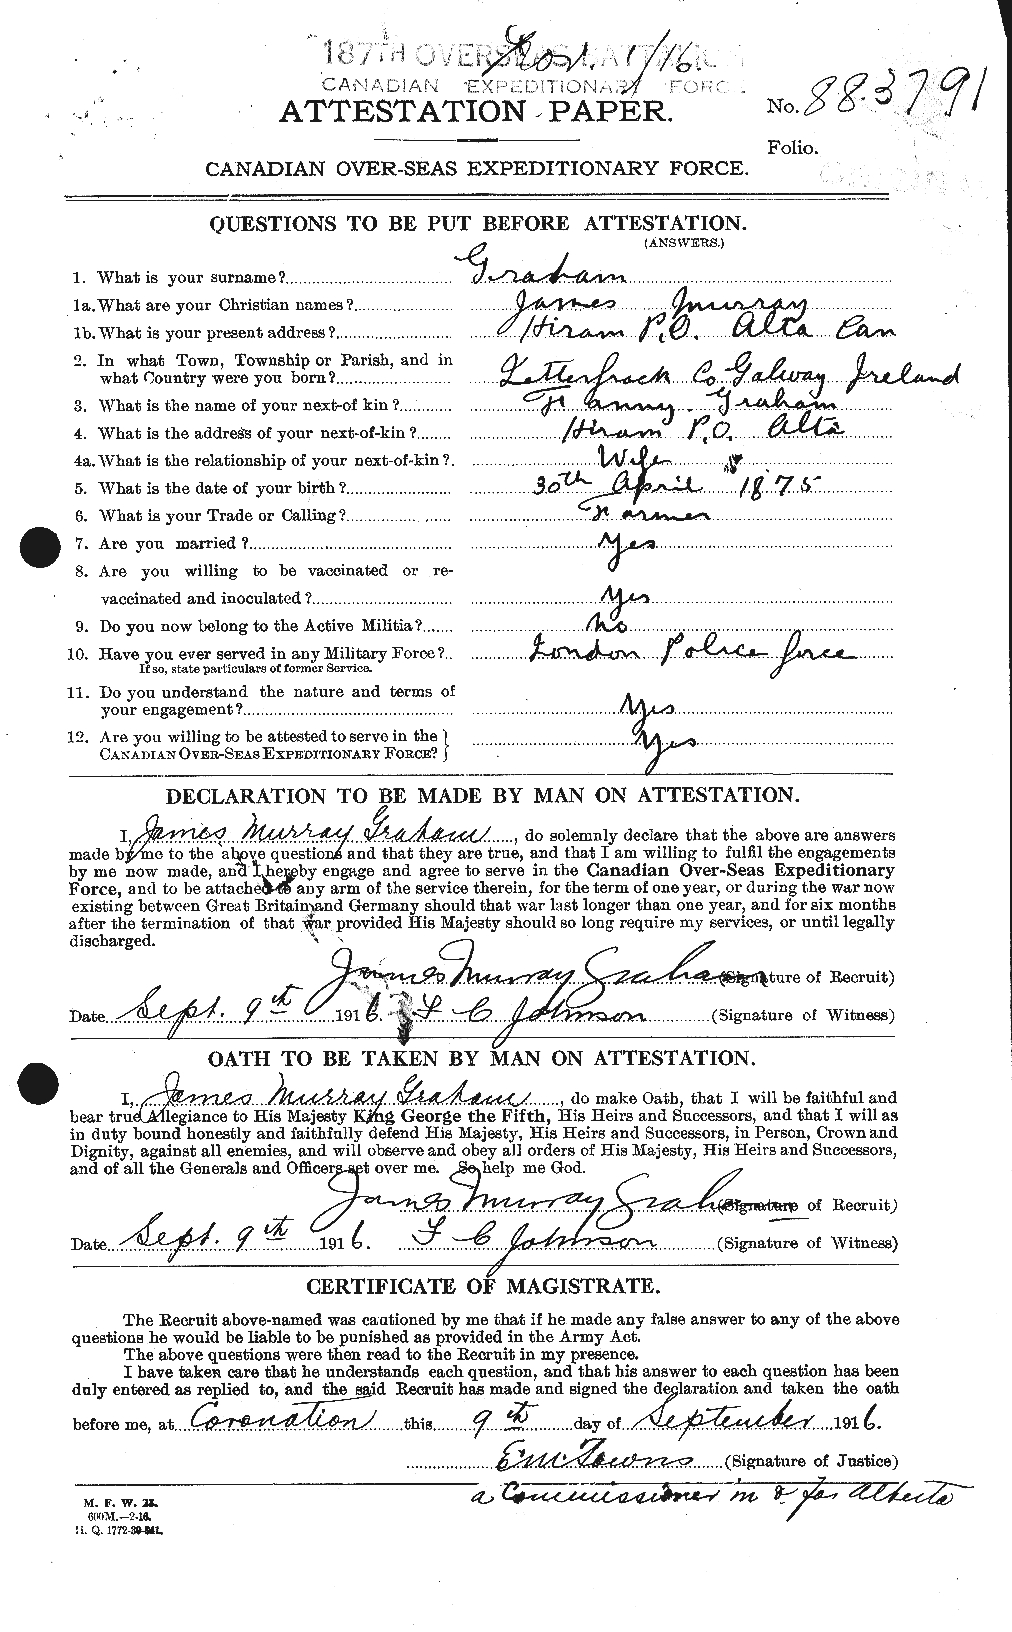 Personnel Records of the First World War - CEF 357831a